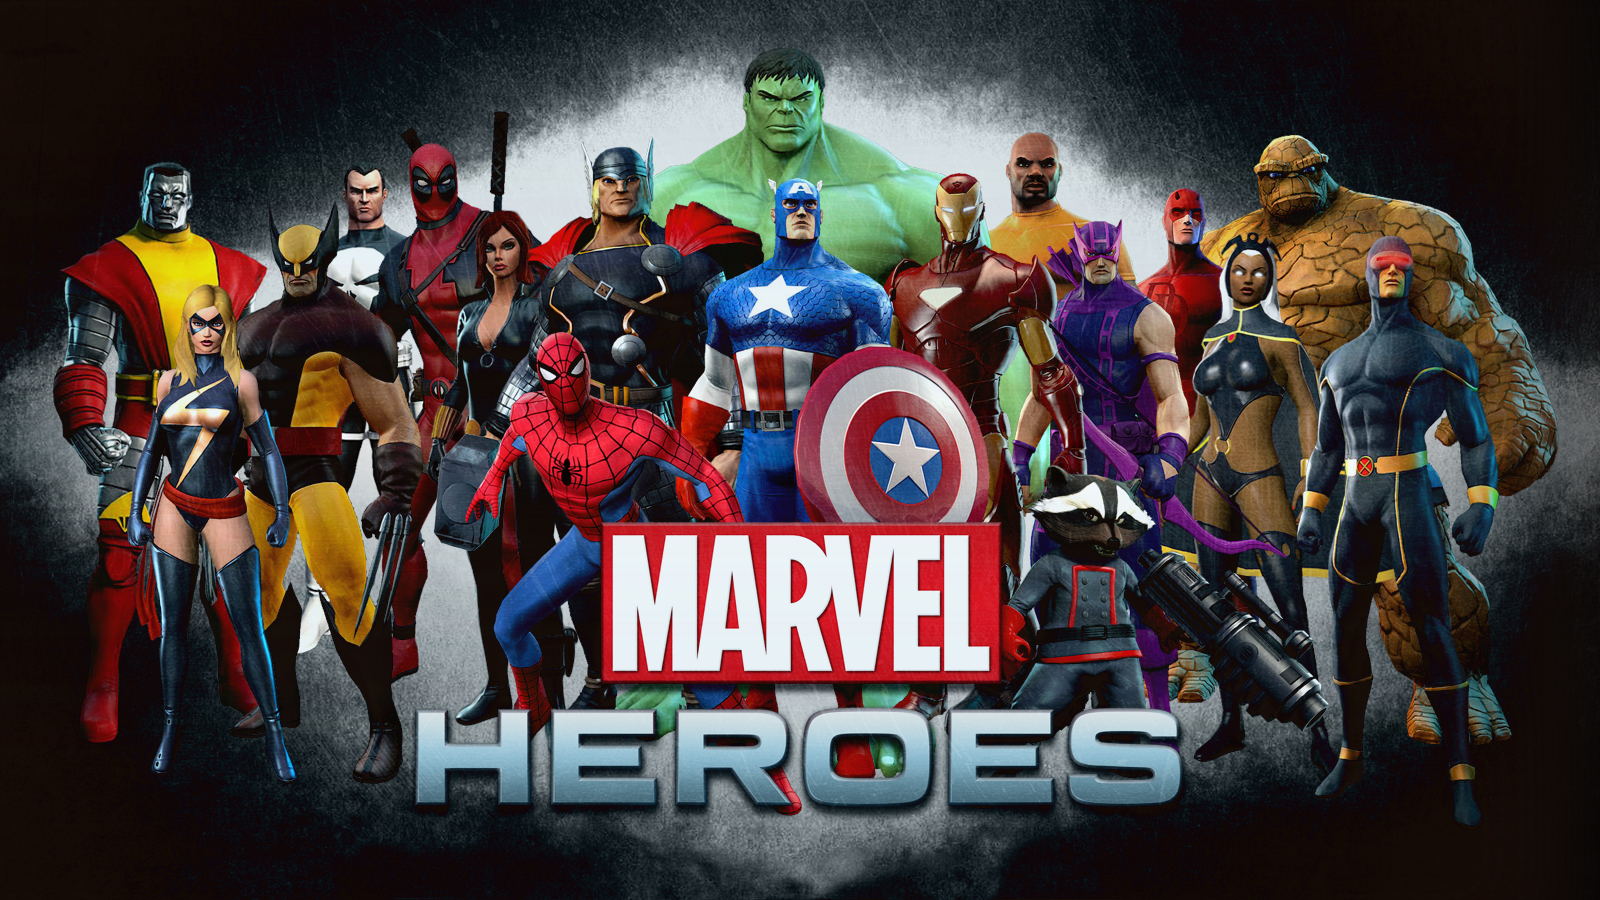 Marvel Heroes Wallpaper by Squiddytron 1600x900